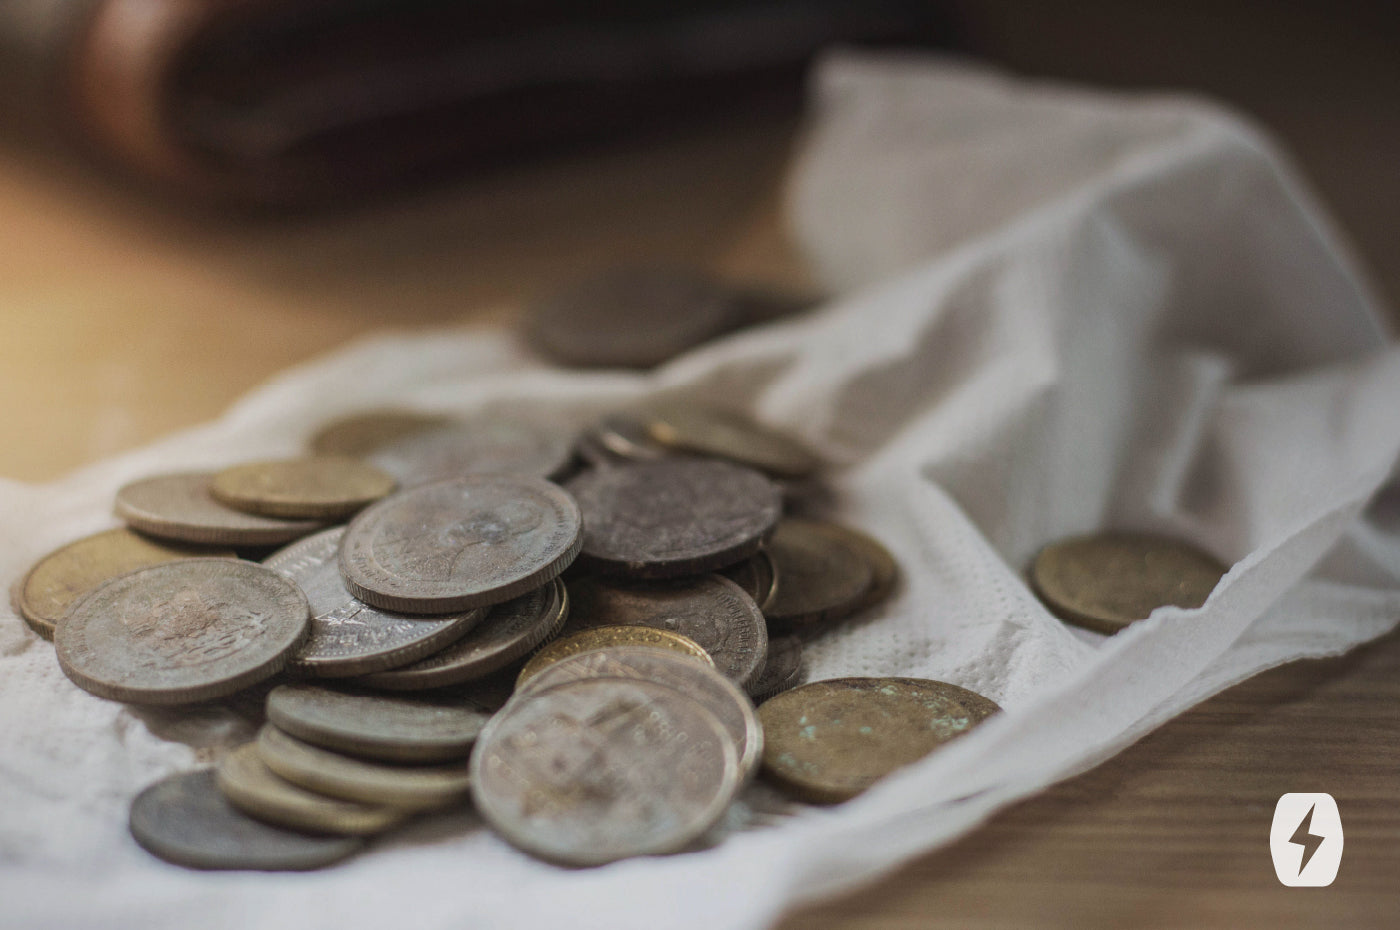 How To Clean Old Coins (Hint: Don't!)